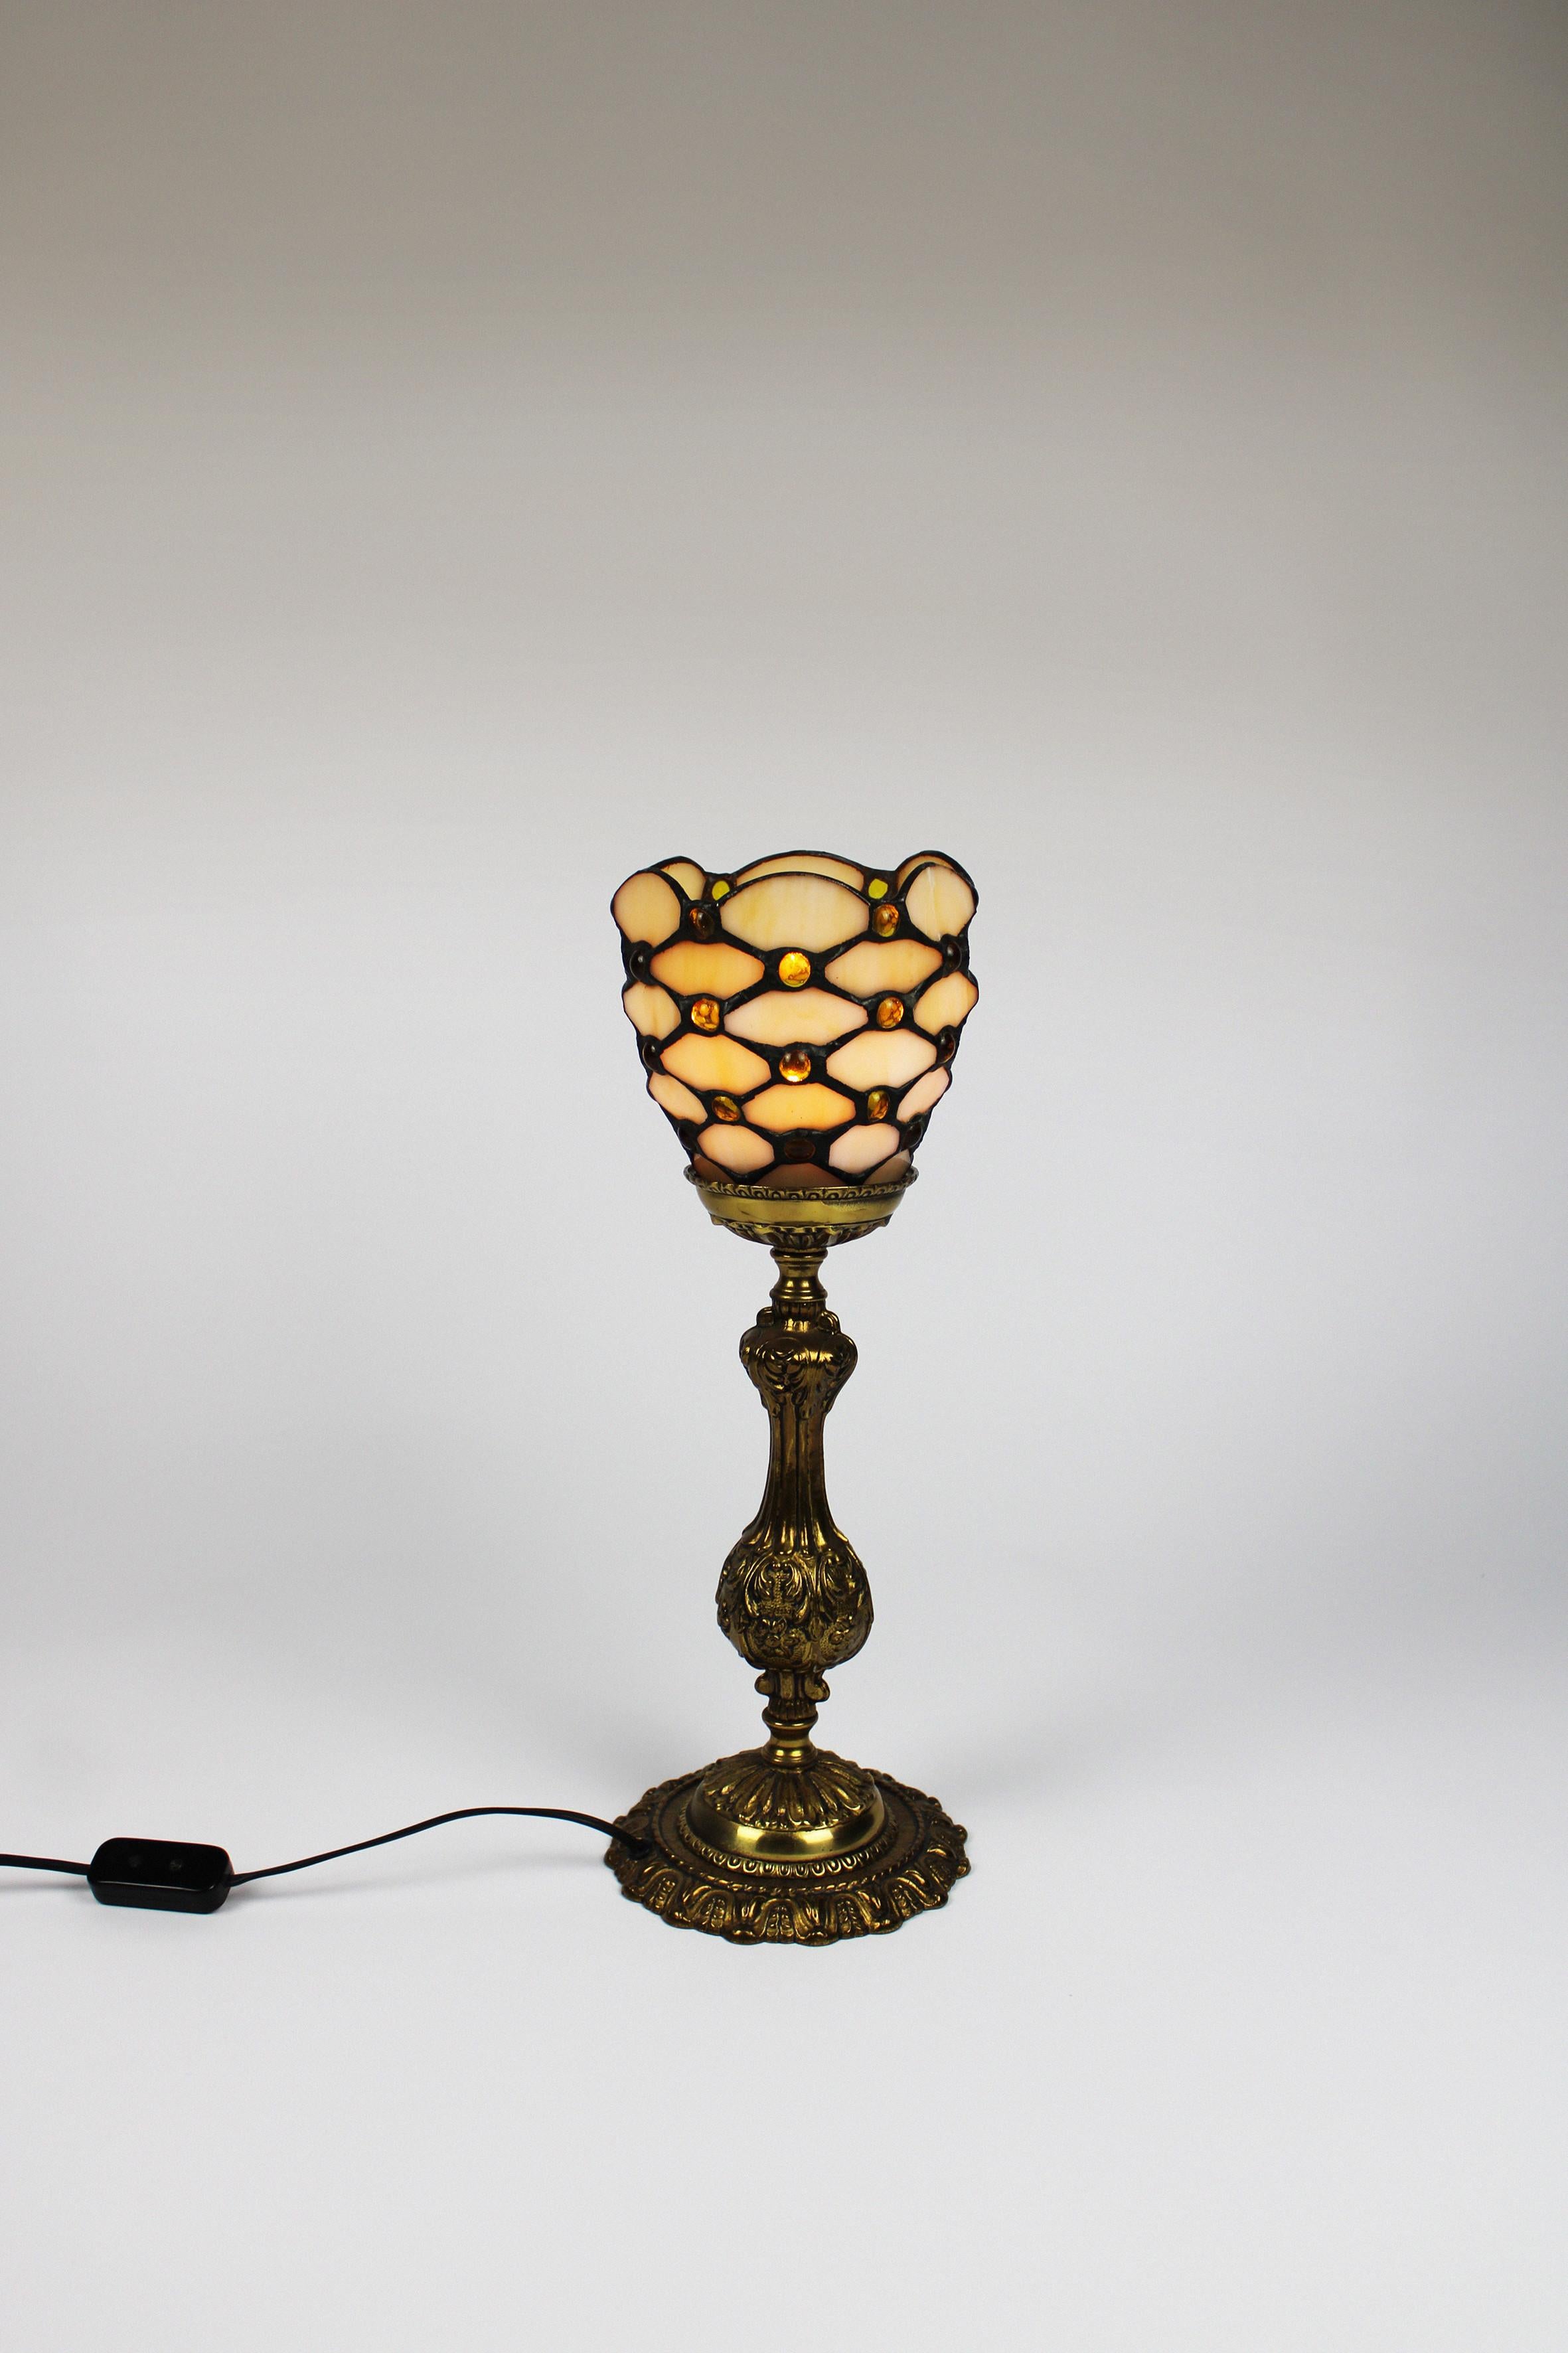 Tiffany style table lamp, made around 1950s. Many models, similar to Tiffany, are real eye-catchers for any kind of interior. This table lamp is in fine condition with minor signs of age and a perfect socket and pull cord to operate the lamp. For